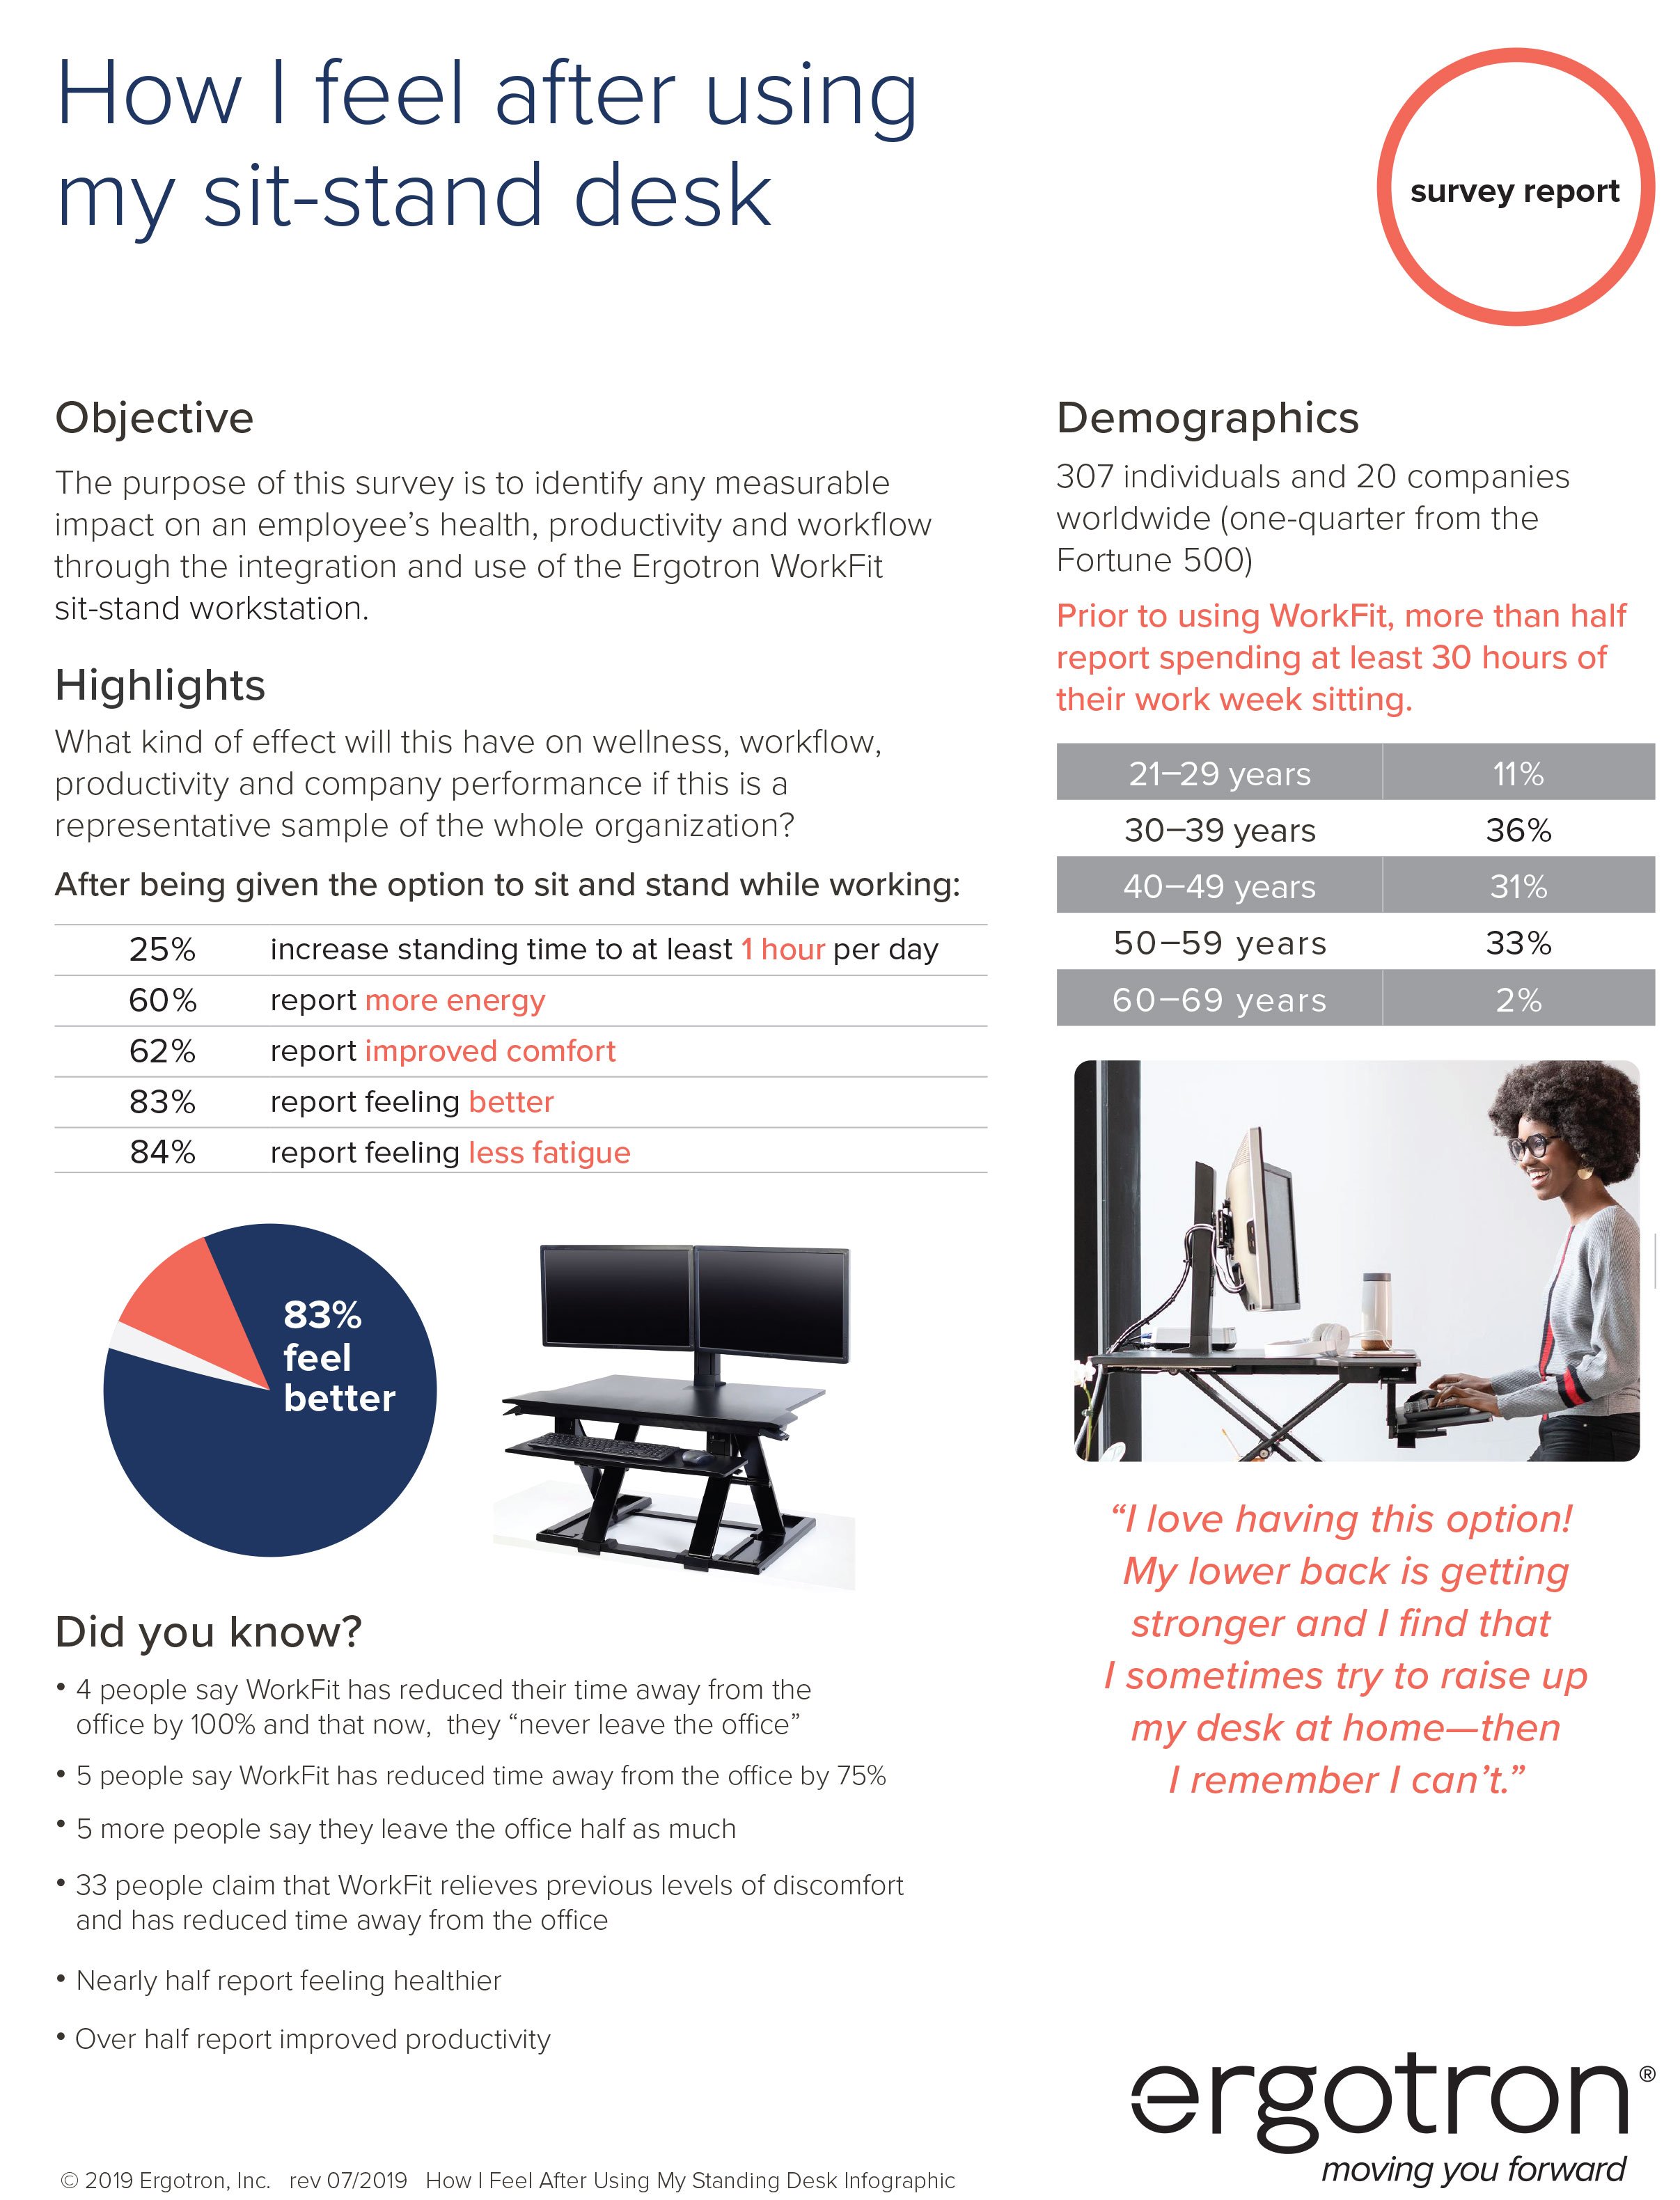 The WorkFit Survey for Sit-Stand Working